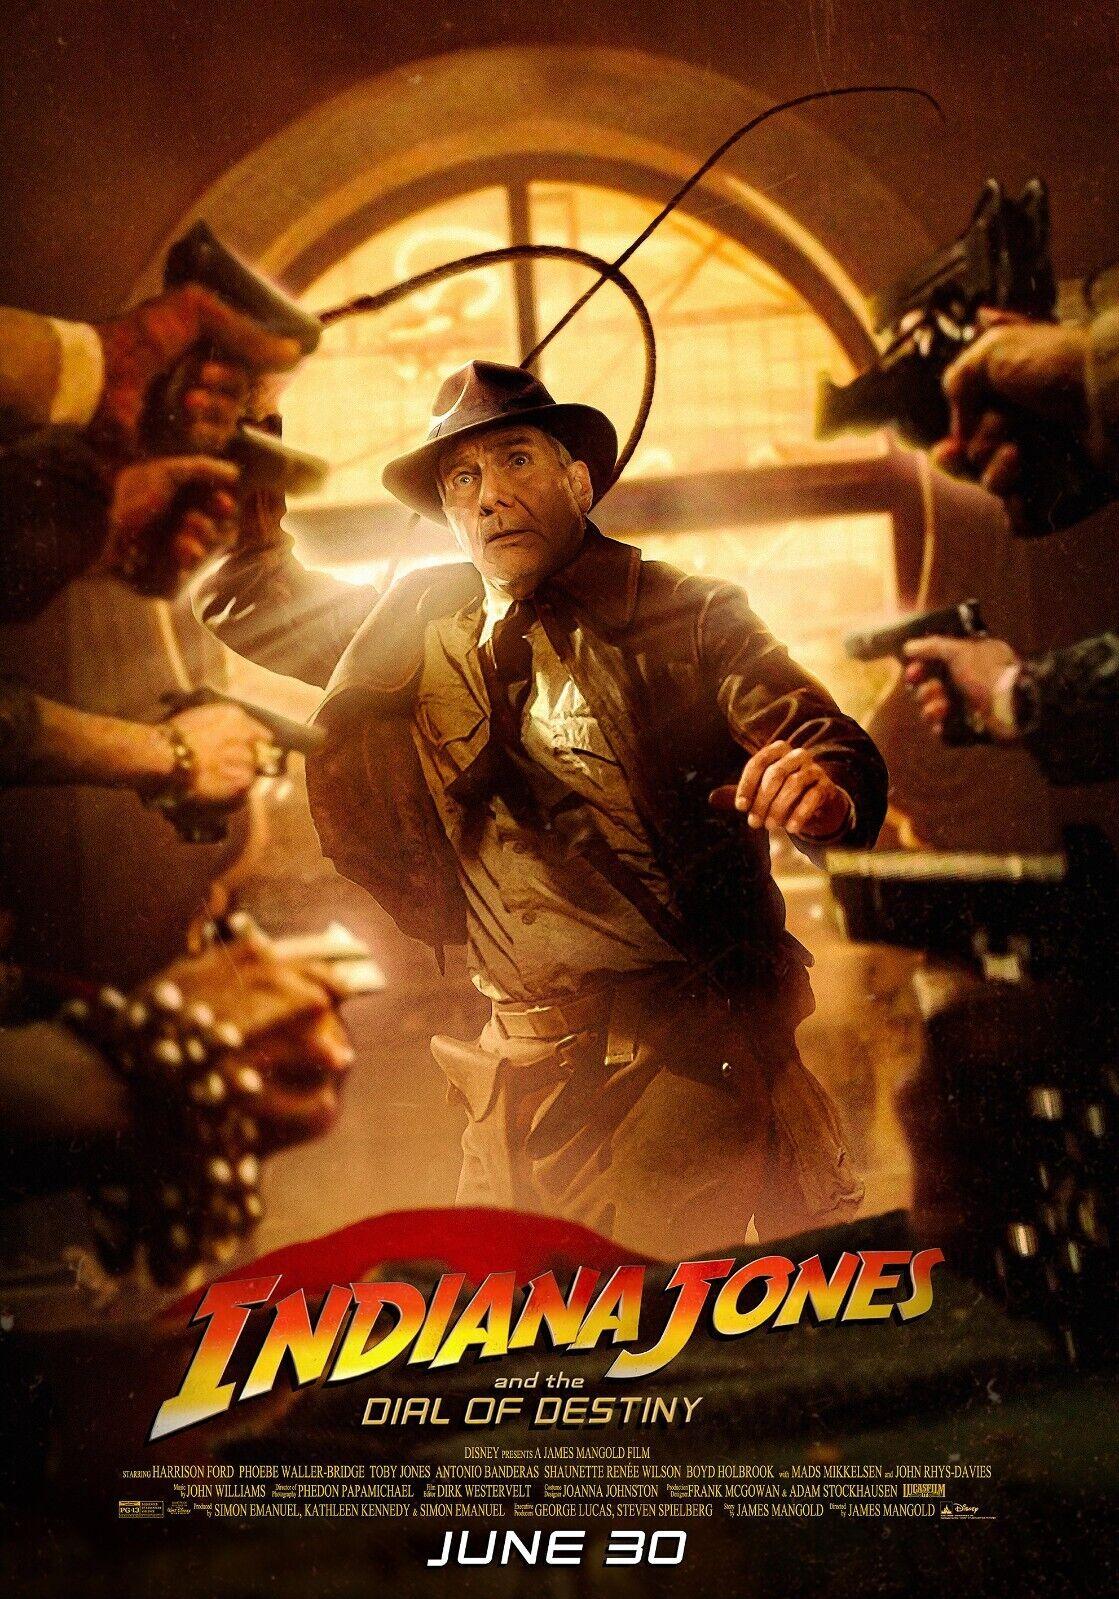 🔥 Free download Indiana Jones and the Dial of Destiny Poster 50x70